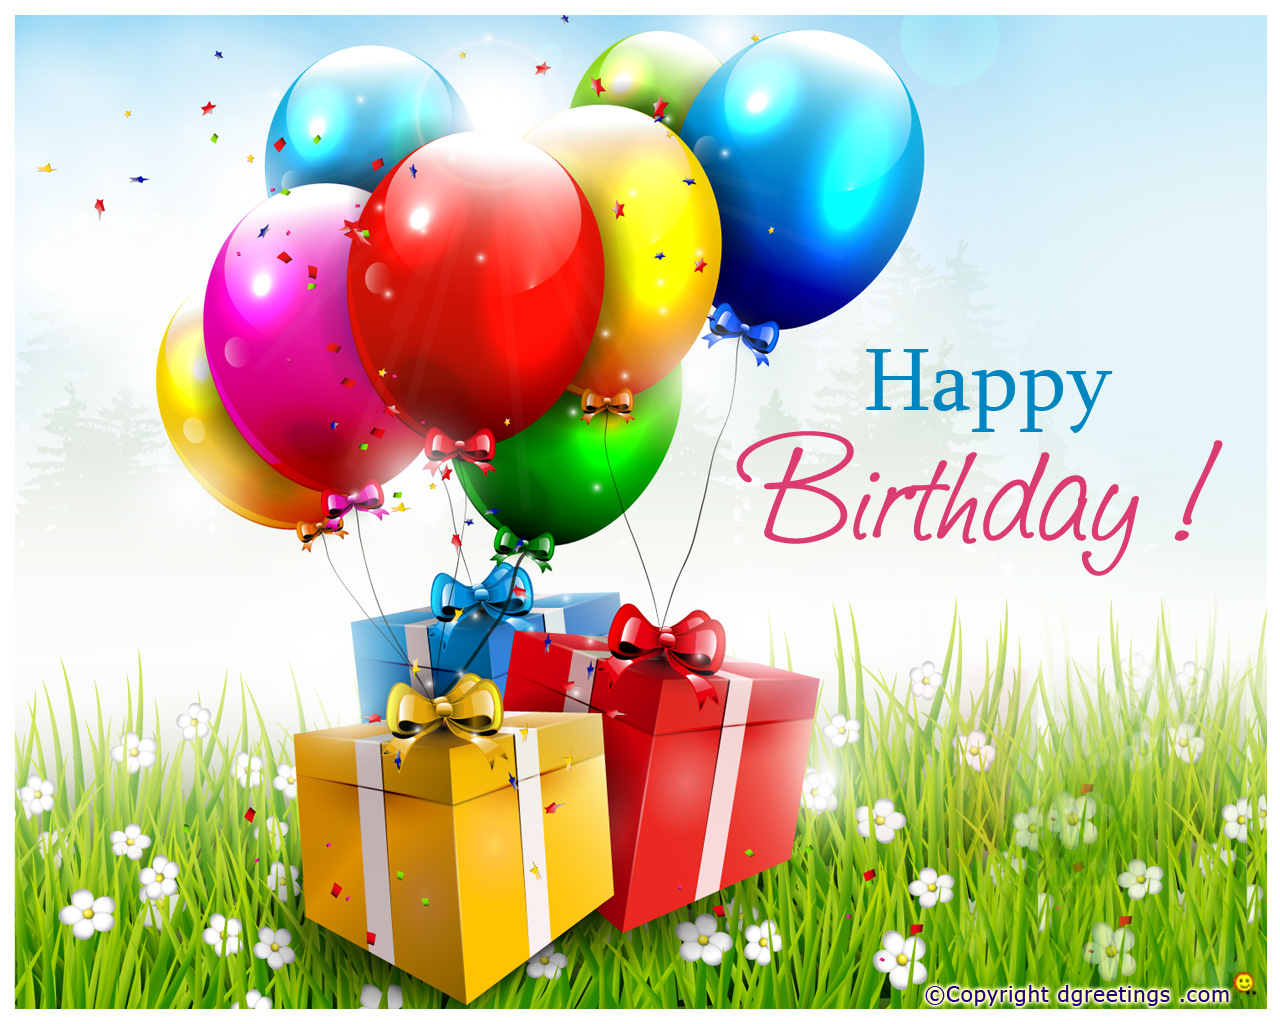 find more wallpapers more birthday wallpaper